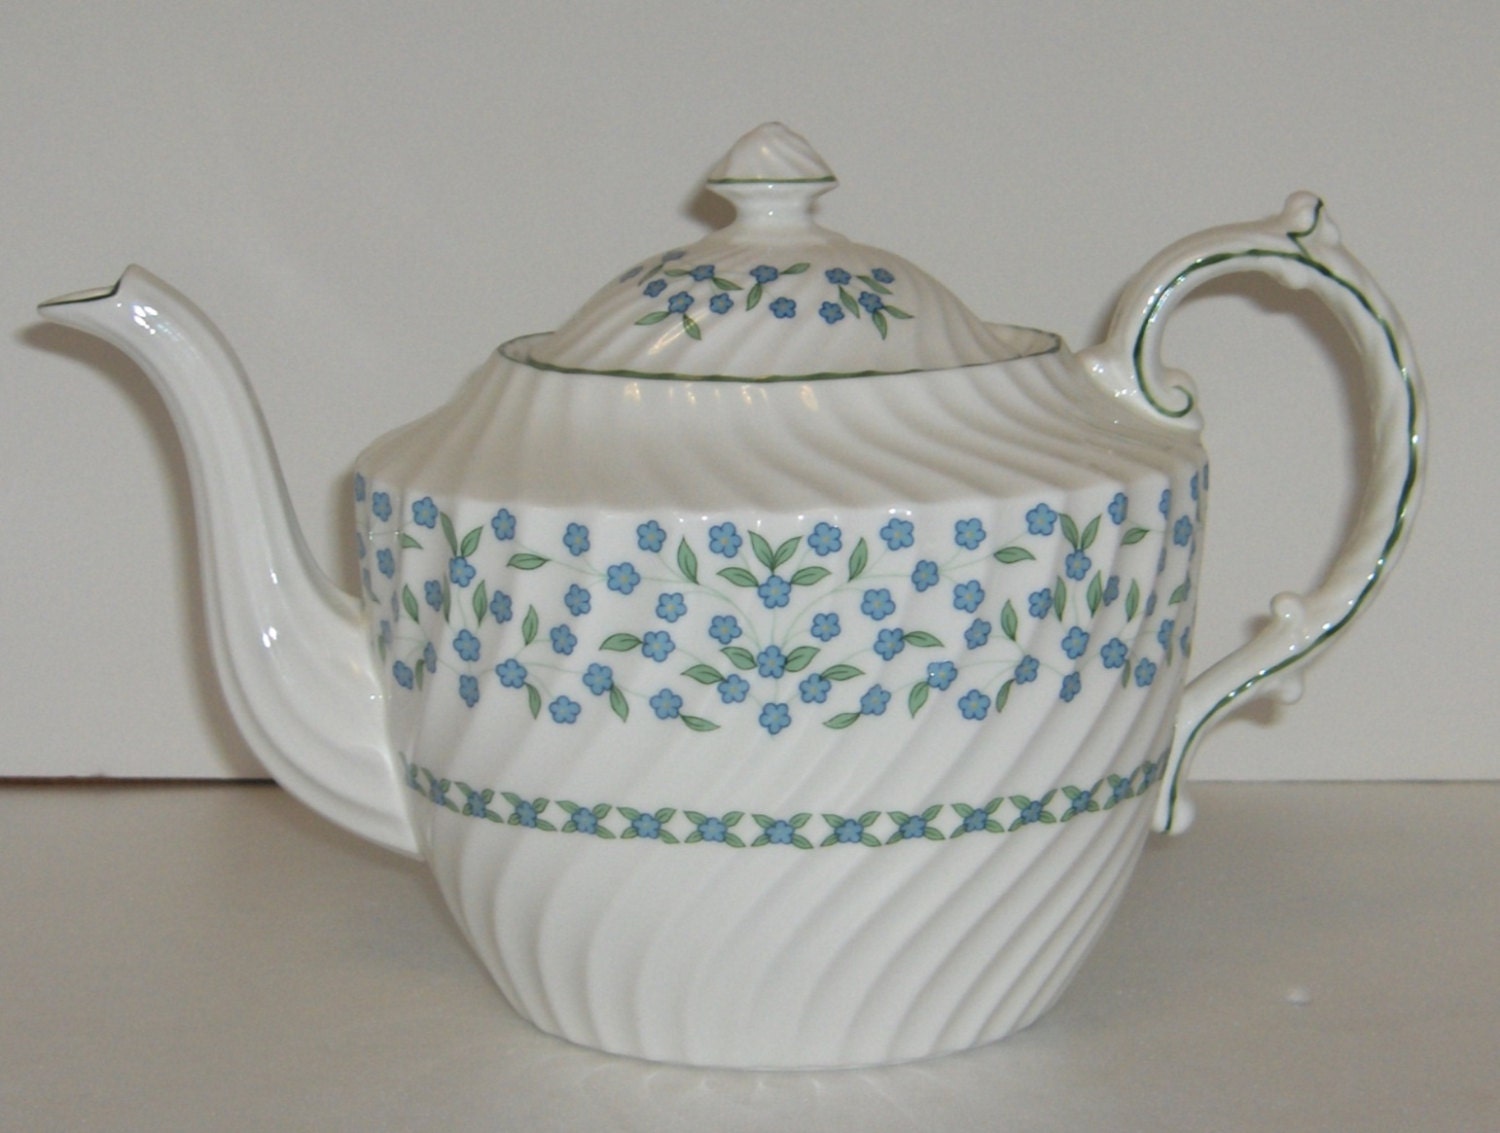 6 cup teapot Made in England Covered Sugar and Creamer Adderley Fragrance Swirl Design Pattern 889 Teapot Free Standard Shipping USA